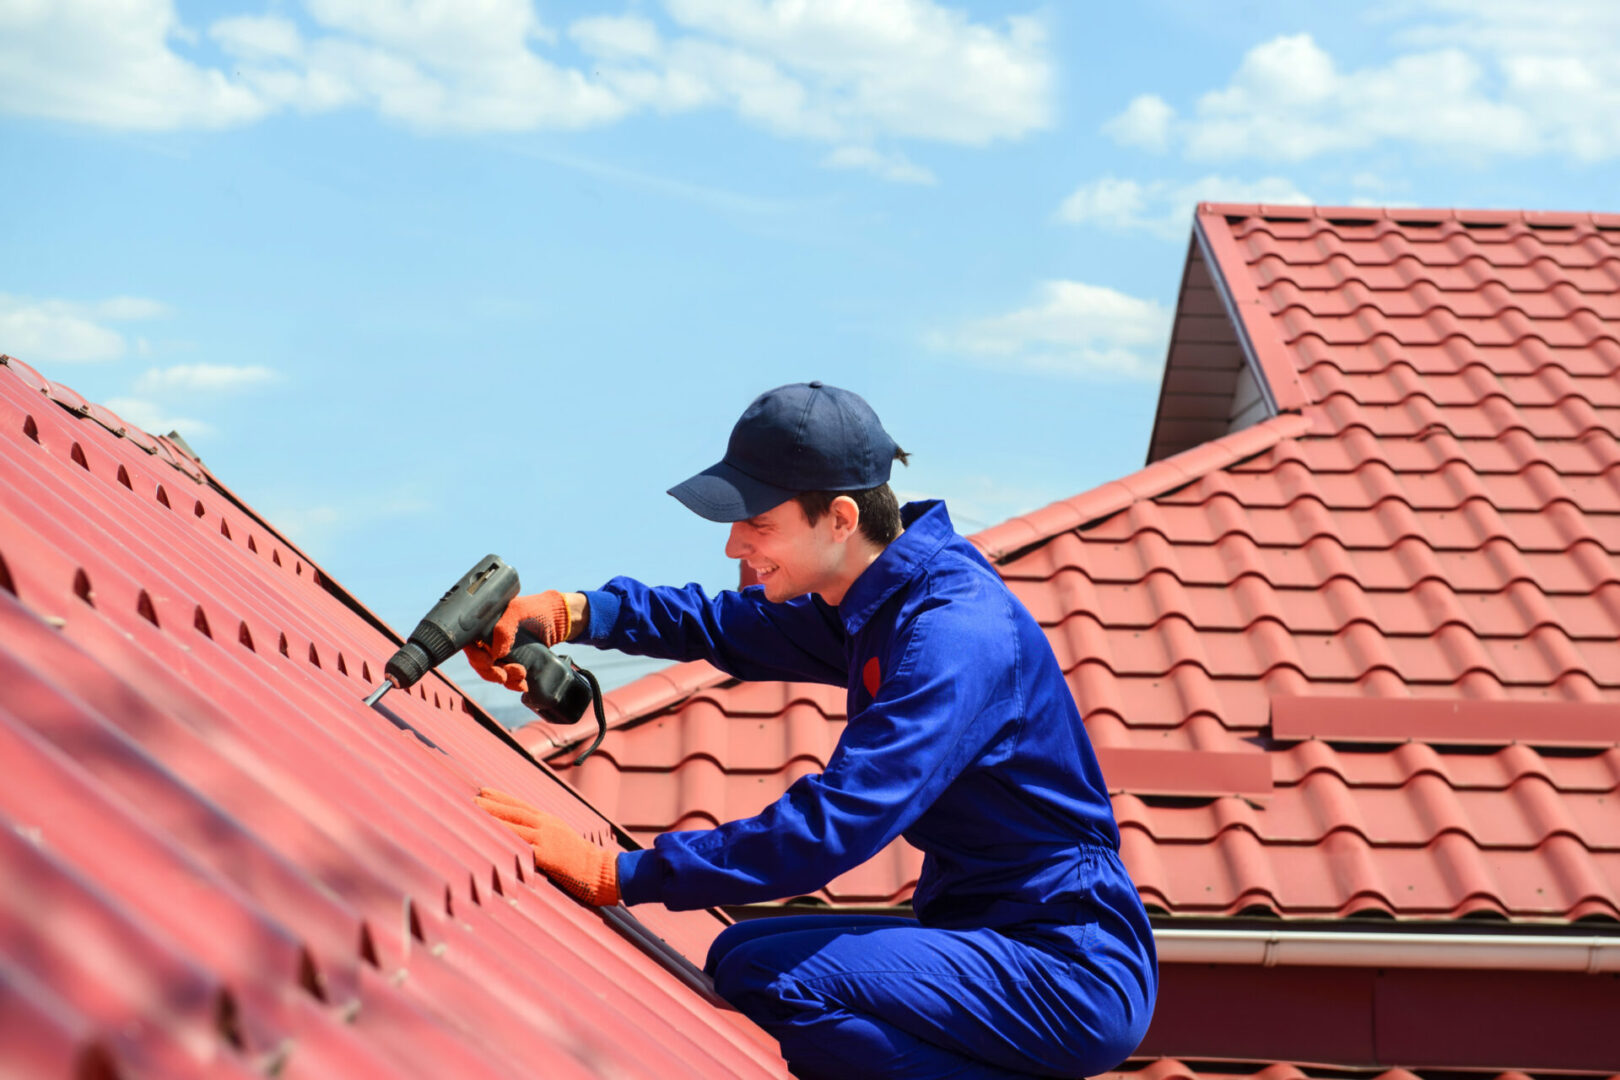 Roofer works on residential roof tiles with a power drill.